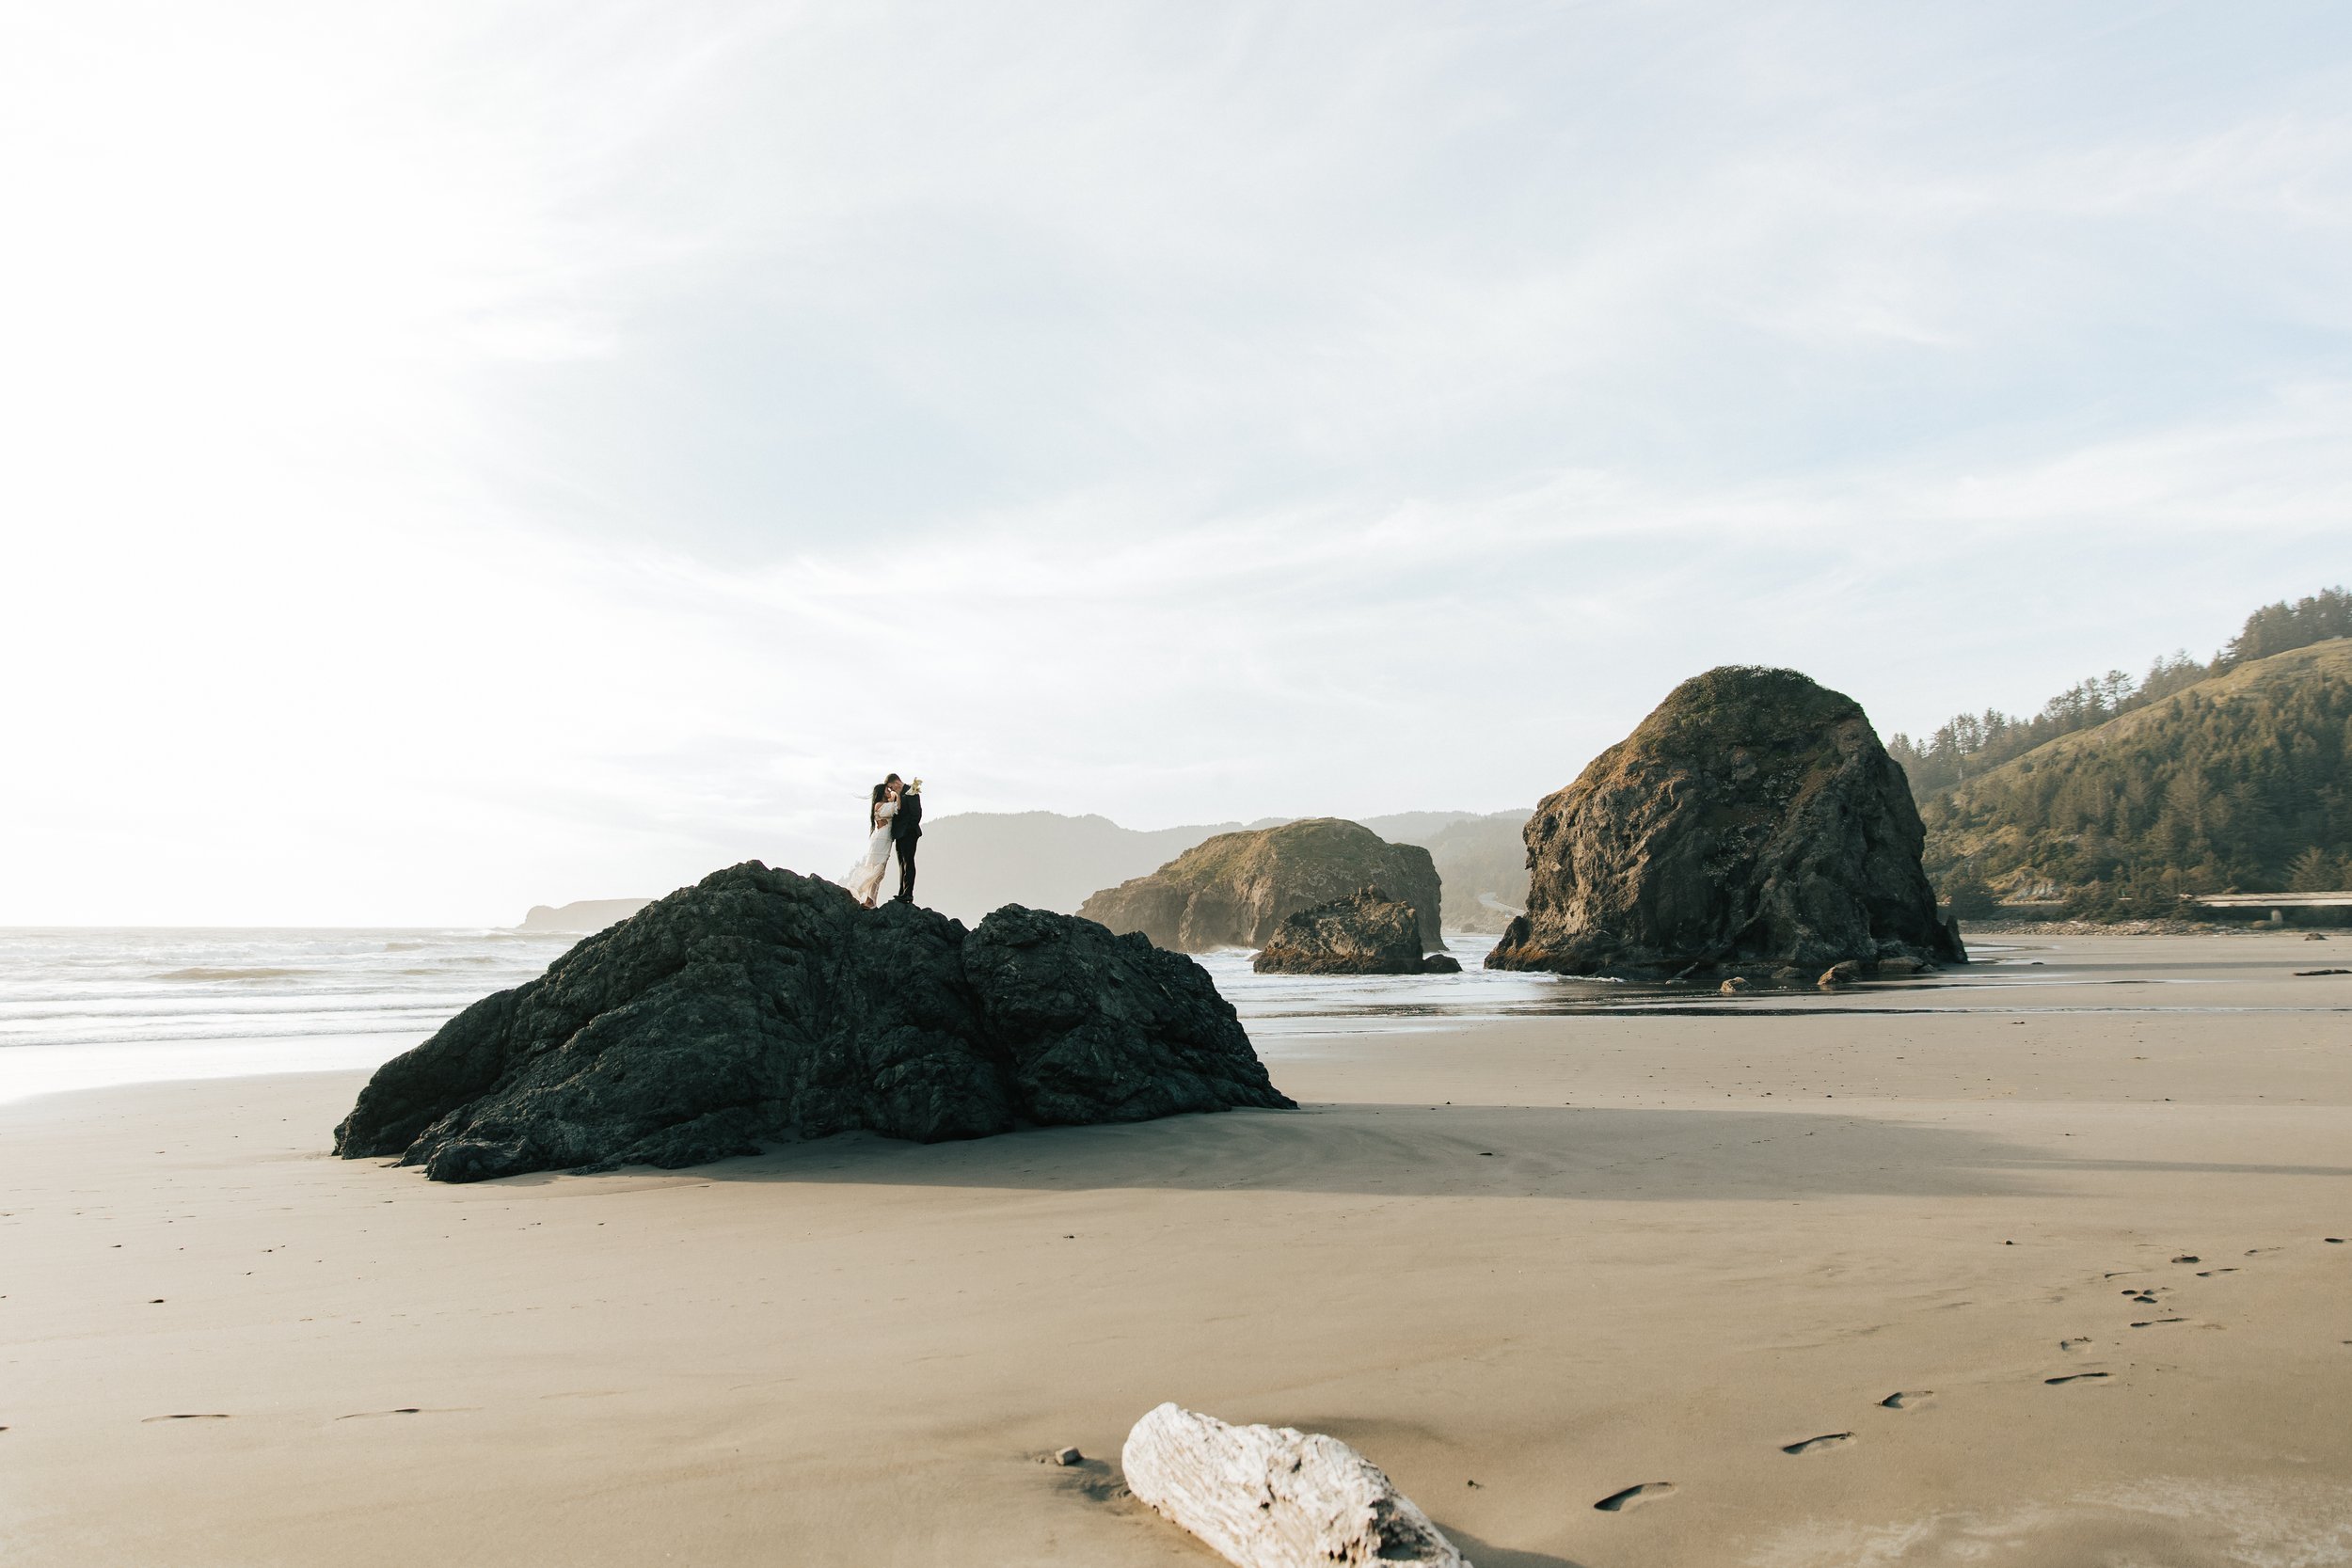  Oregon coast elopement. Couple elopes on the beach with the sun shining behind them. Sun rays behind rocks. Beach with rocks and haystacks. Southern Oregon. Couple stands up on a seastack or big rock far away on the beach. Brookings, Oregon. Samuel 